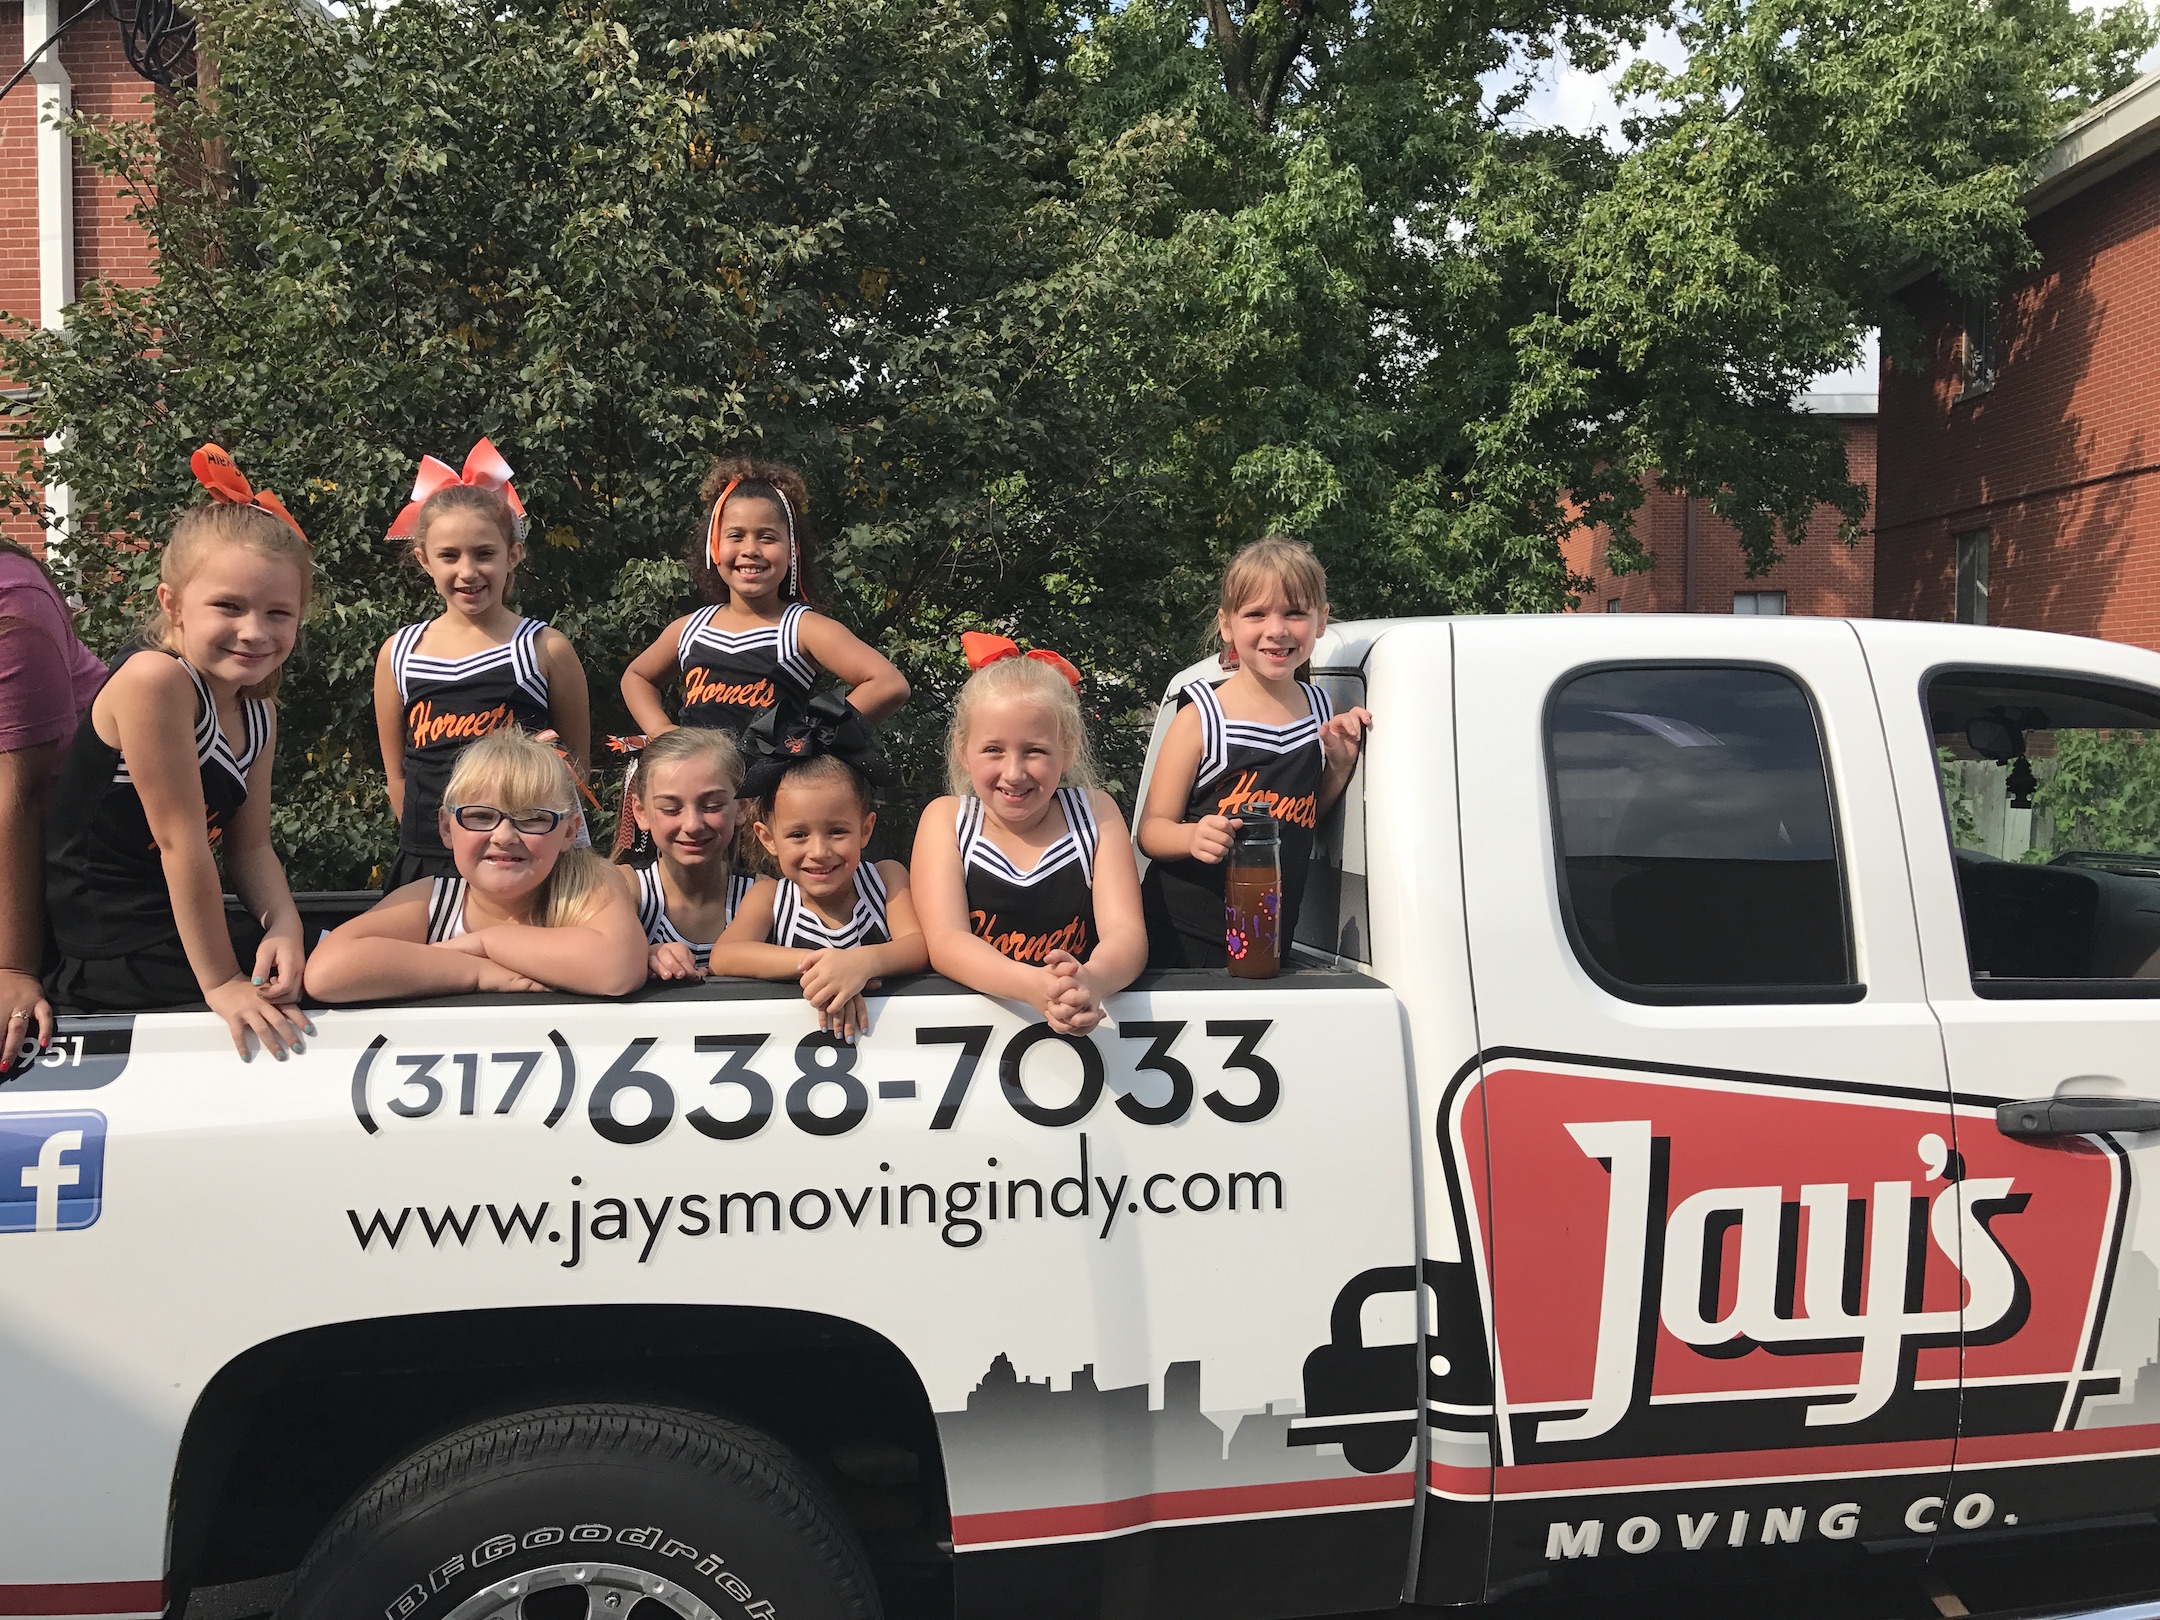 Jay's Moving Company supports the community